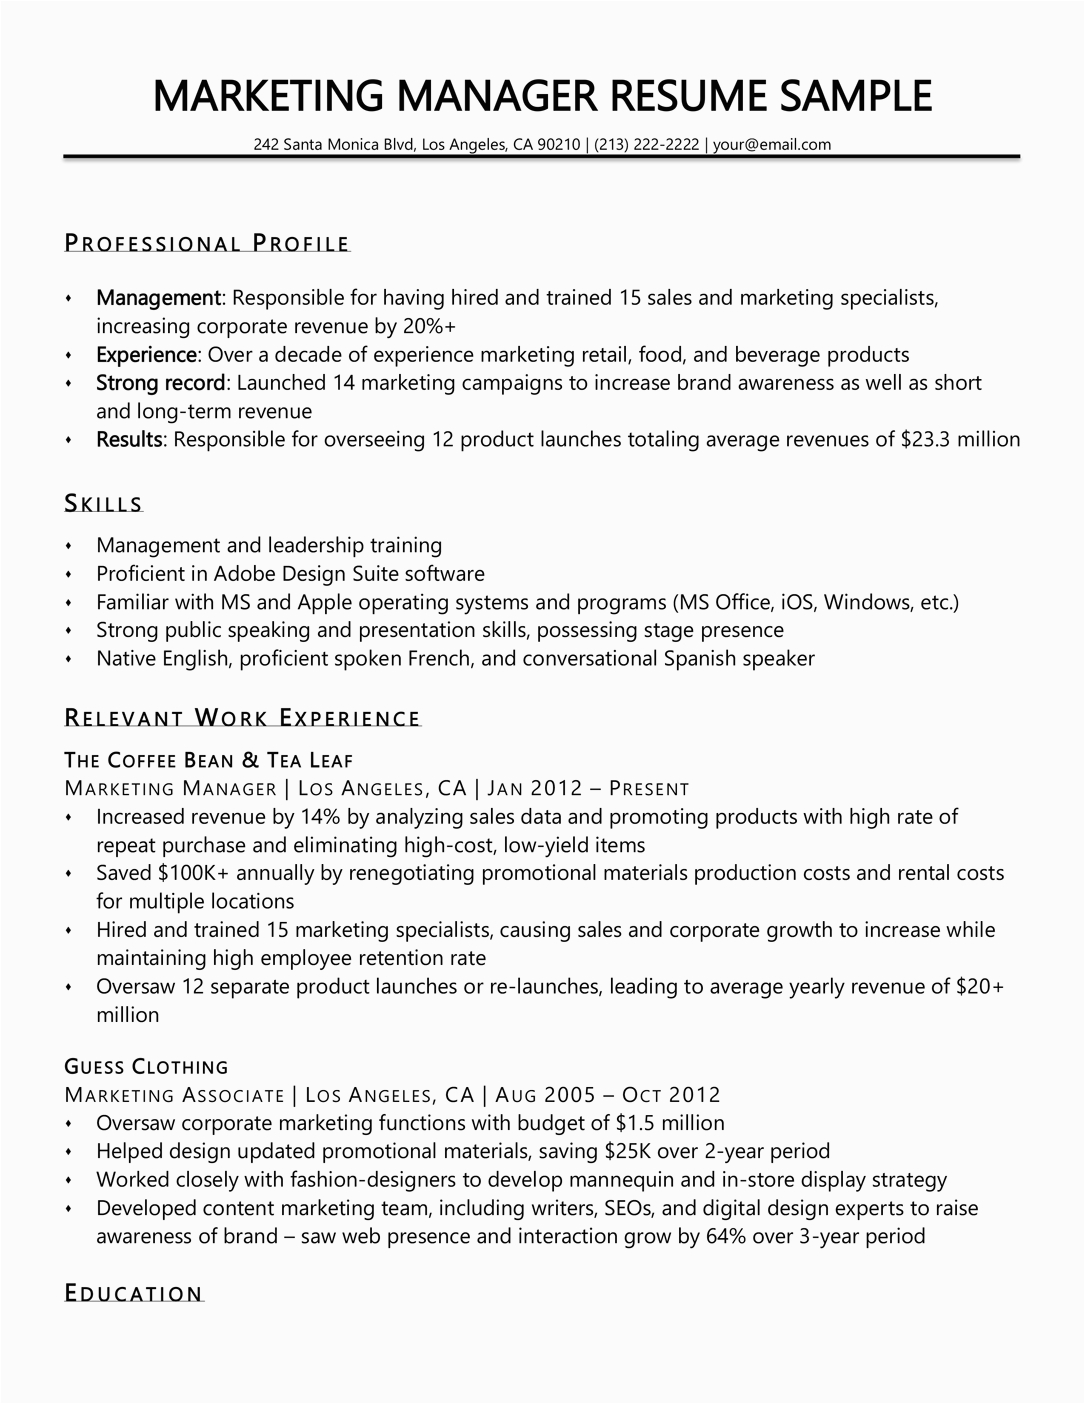 Sales and Marketing Manager Resume Sample Doc Marketing Manager Resume Sample